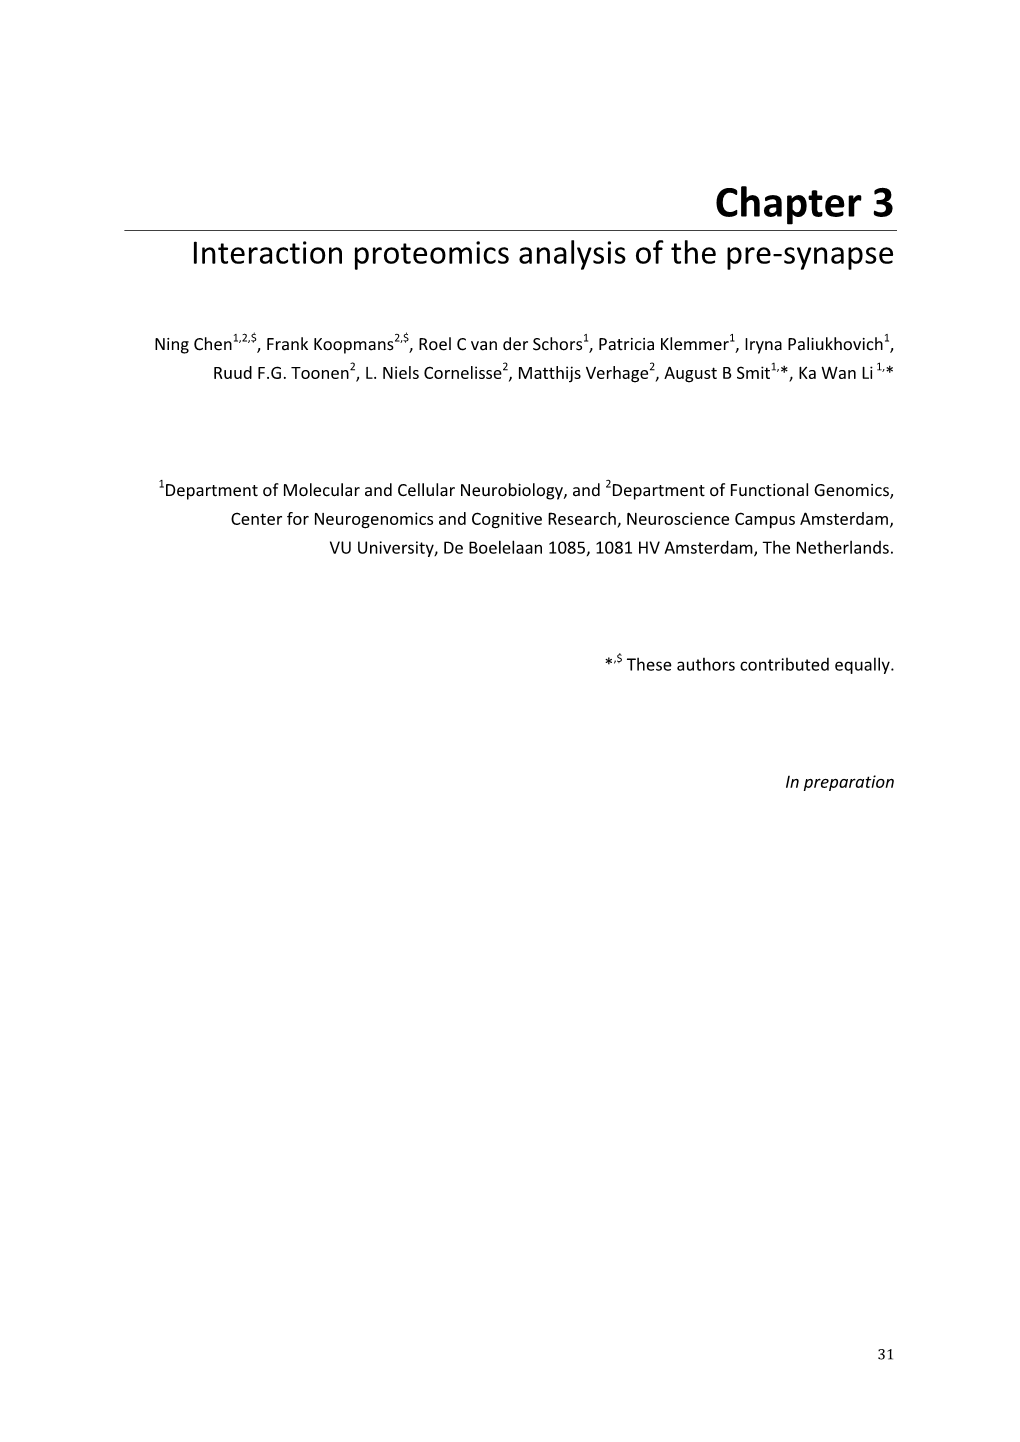 Chapter 3 Interaction Proteomics Analysis of the Pre Synapse